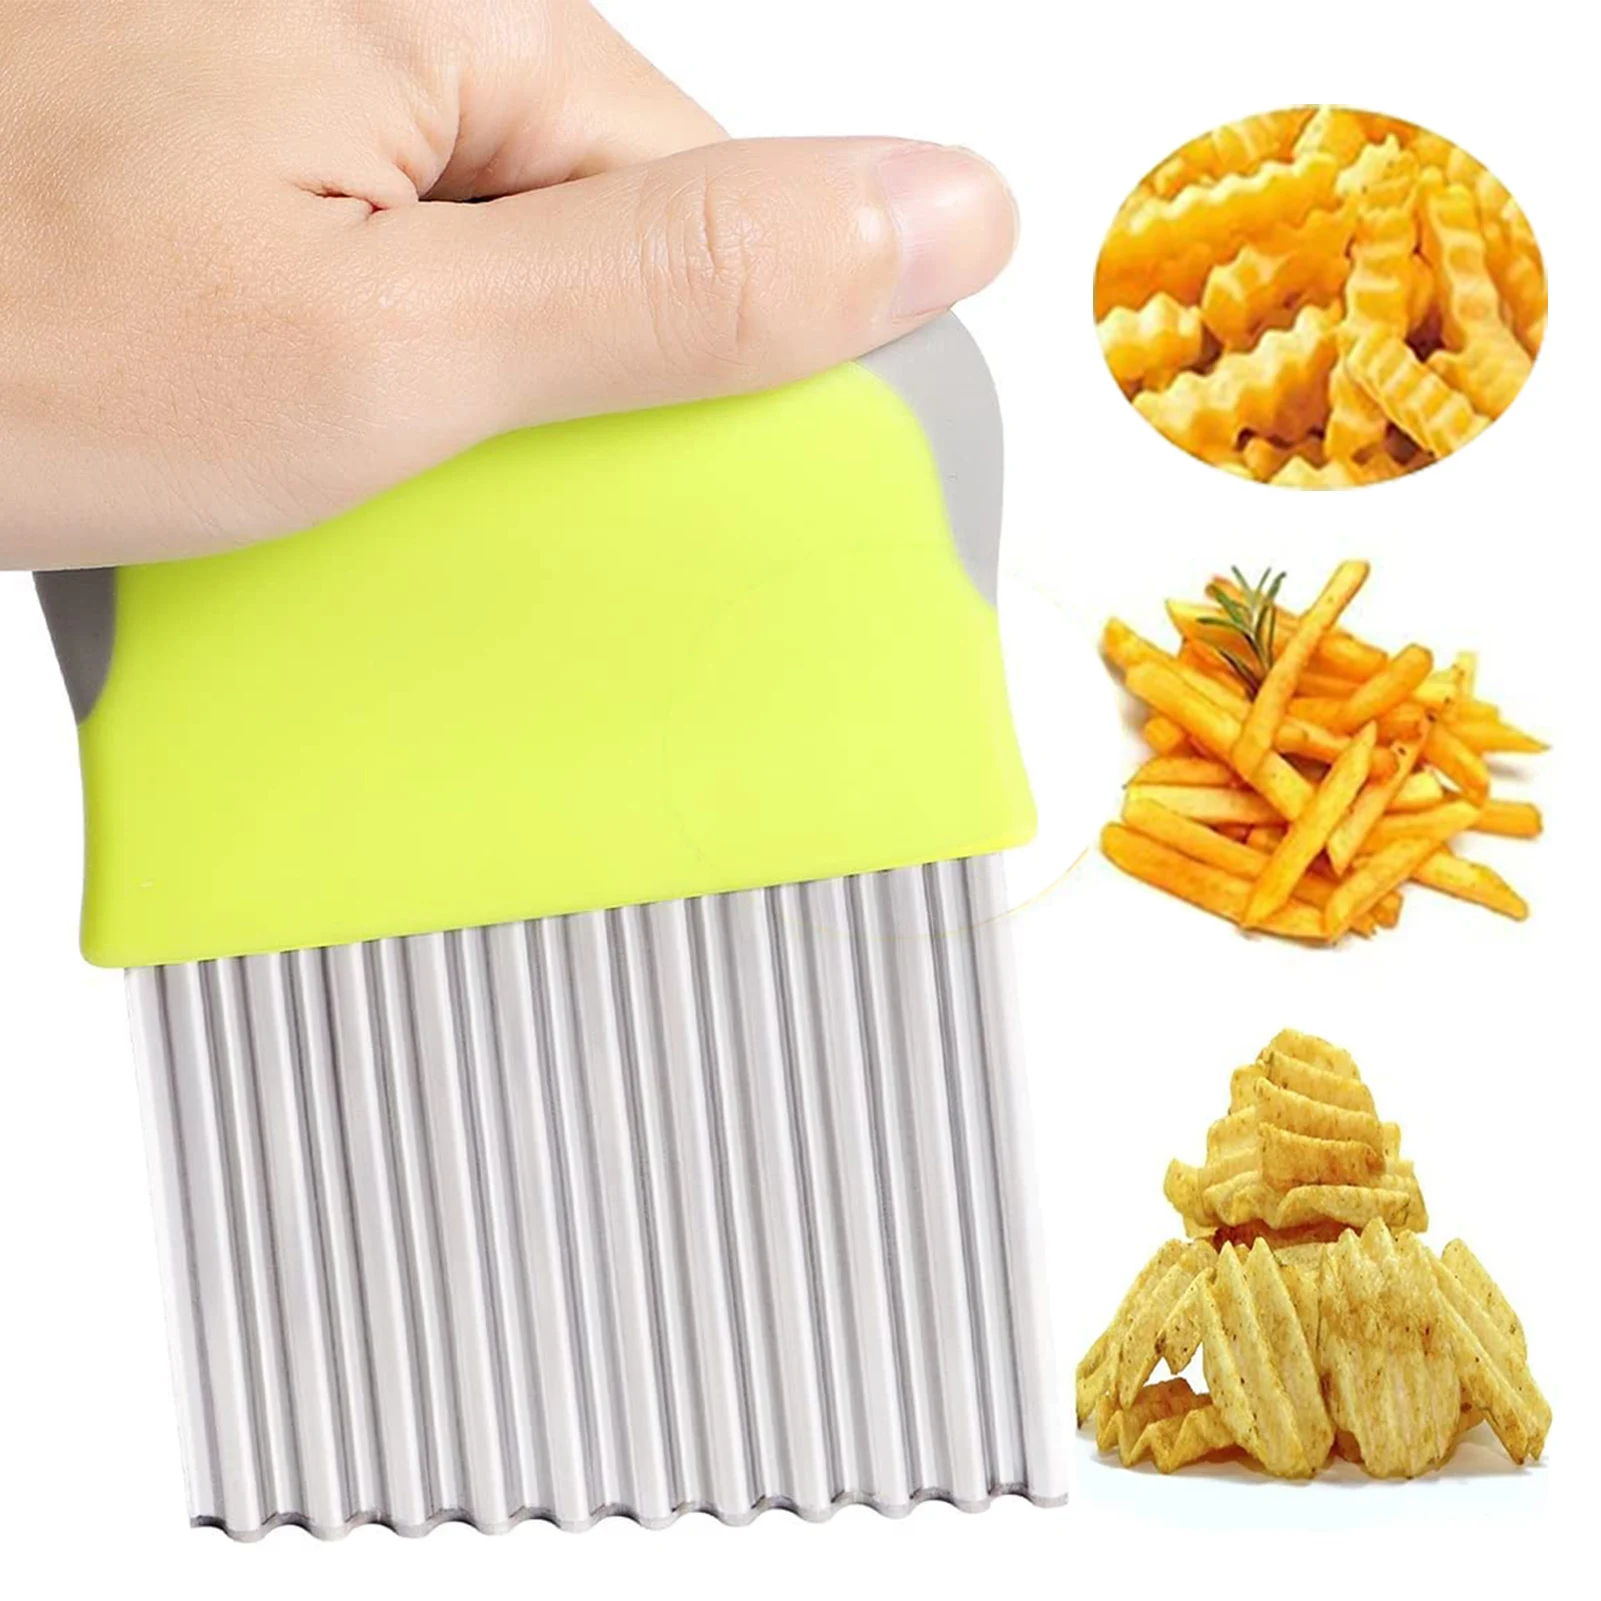 

Wave Potato Cutter Chips Stainless Steel Wavy Slicer For Potatoes Cucumbers Non-Slip Handle Vegetable Choppers For Kitchen